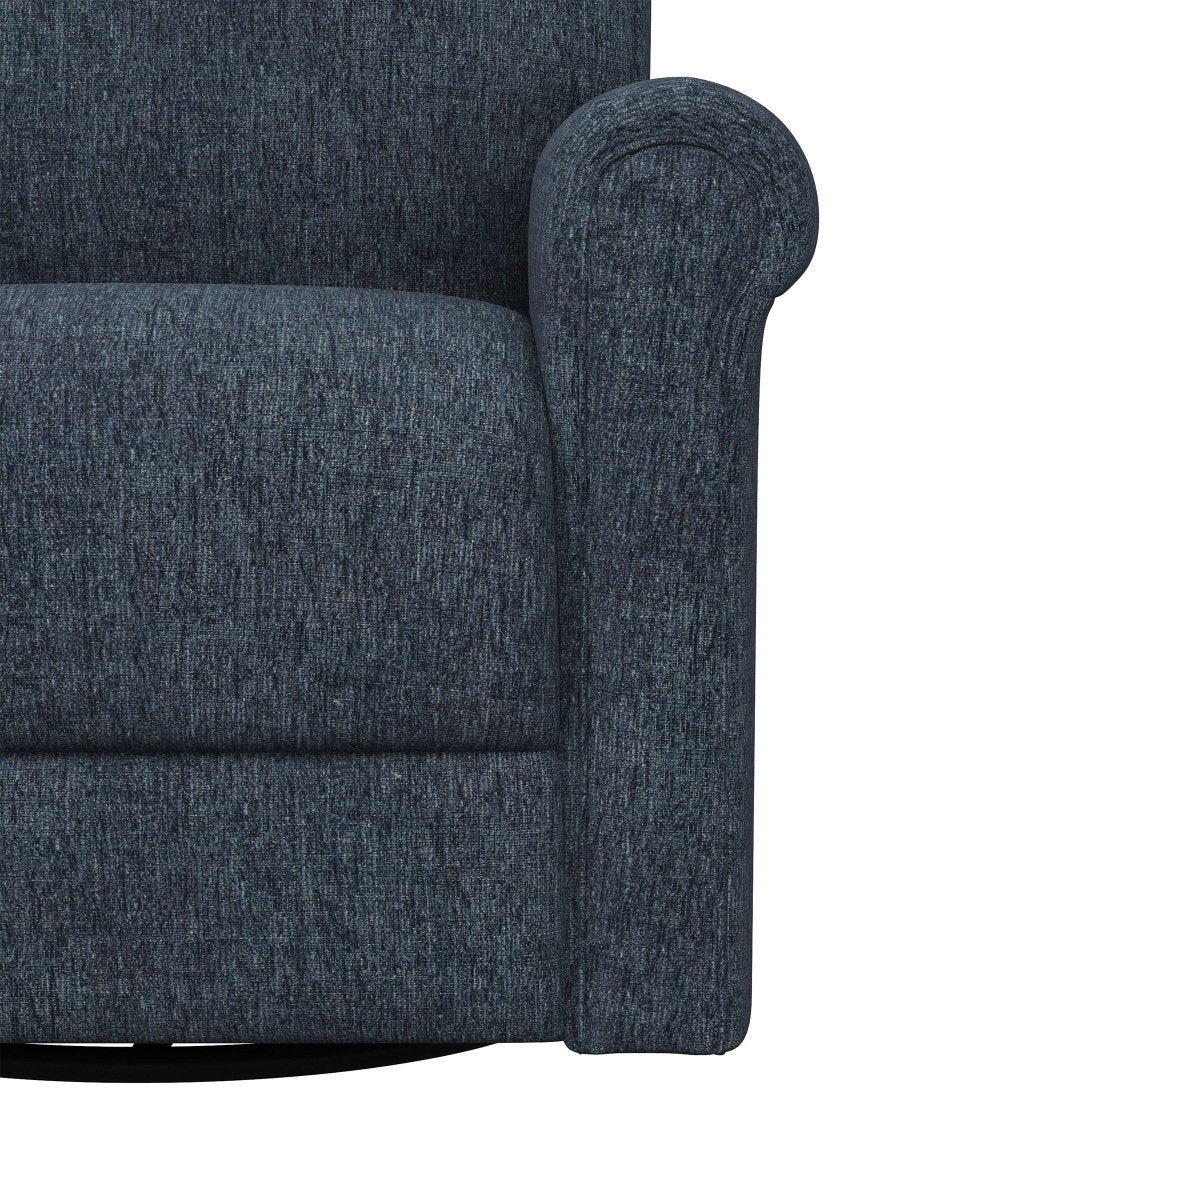 Andrews Fabric Swivel Glider Recliner - Alpine Outlets